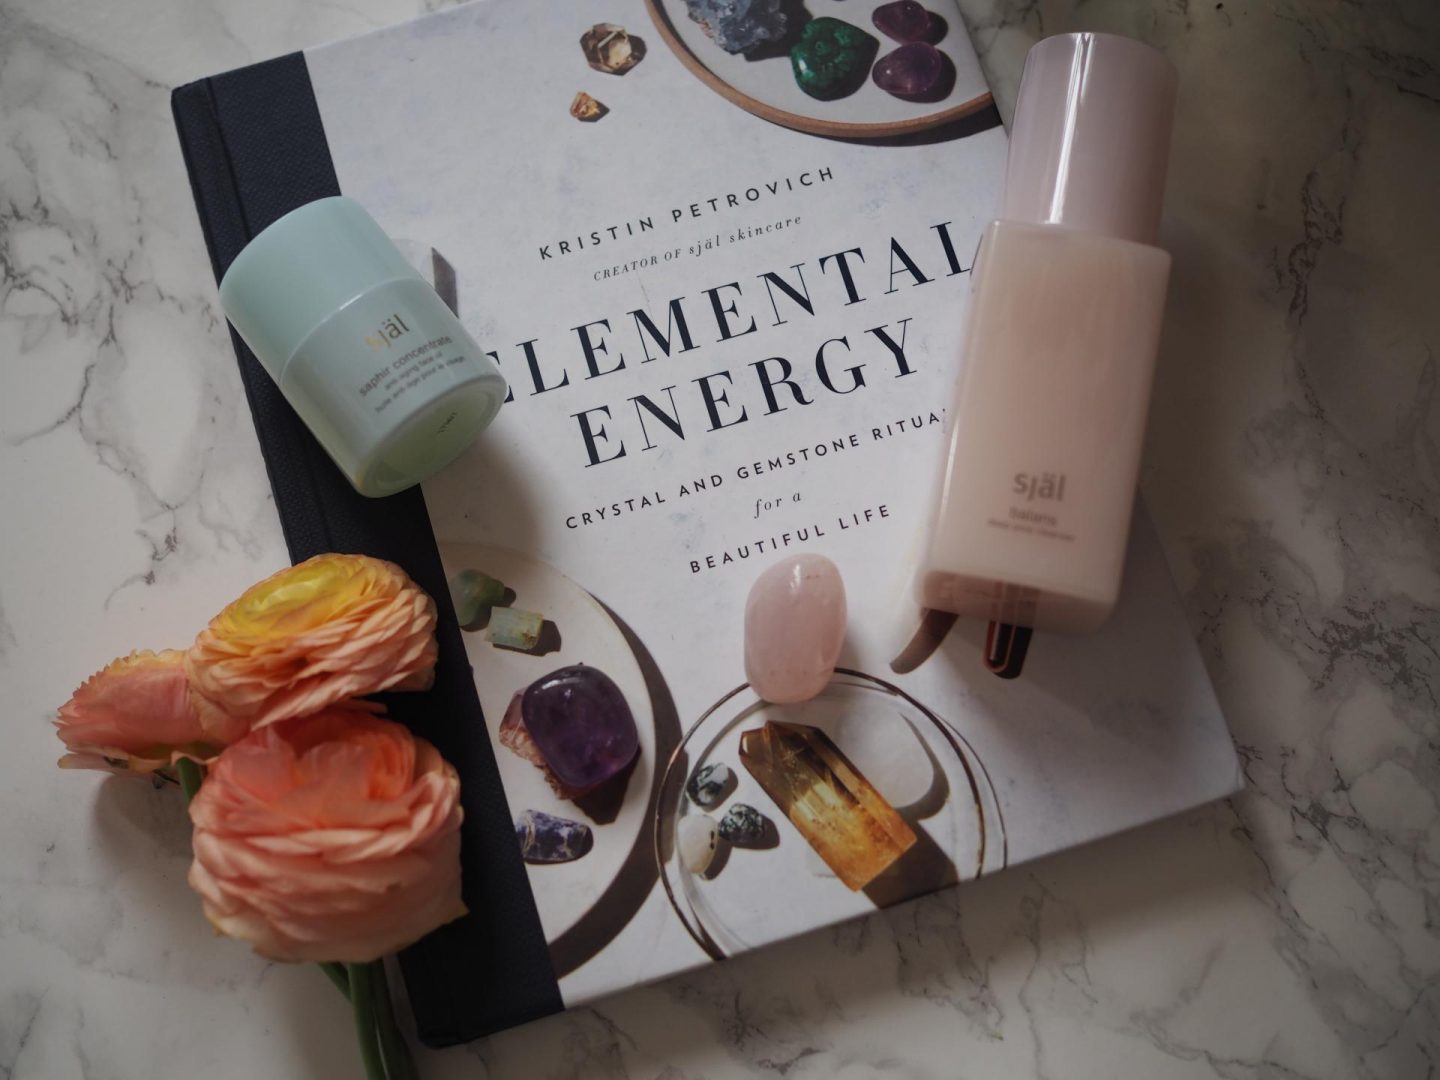 Luxury Skincare That Works: My April Beauty Favourites